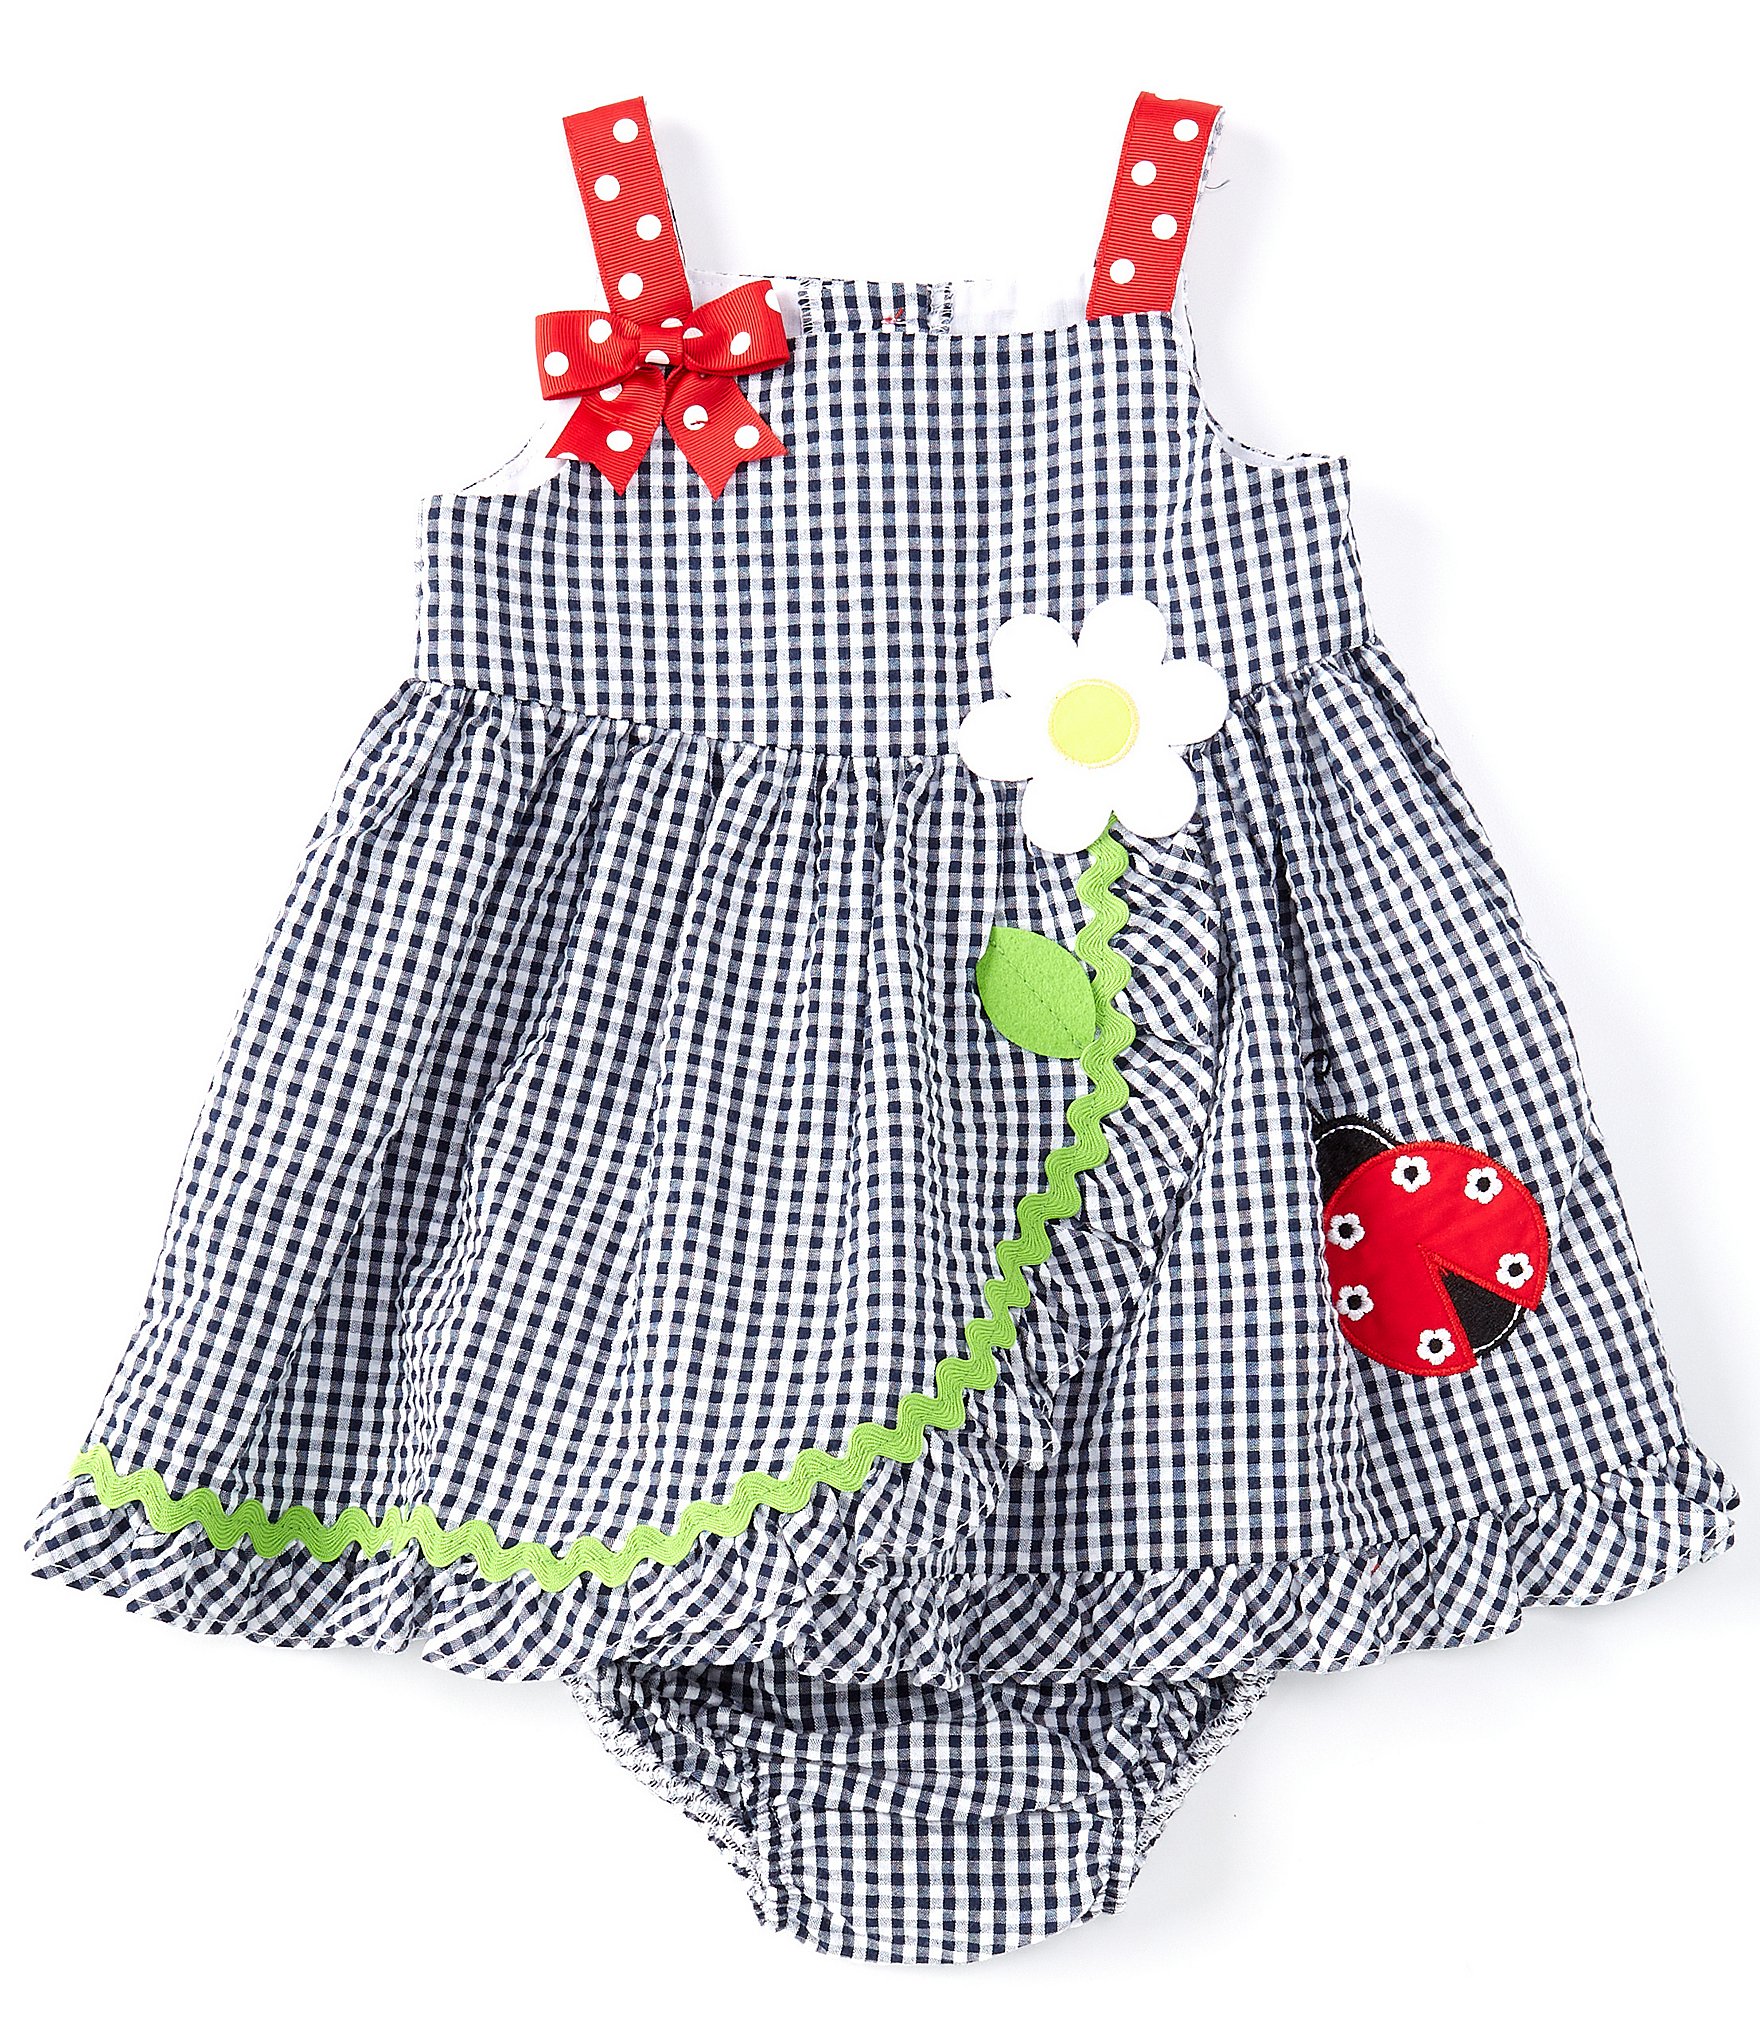 Baby Girls Floral Summer Sleeveless Dress 3 Piece Outfit Set Matching Hairband and Knickers Ruffles White red Navy Cherries Flowers